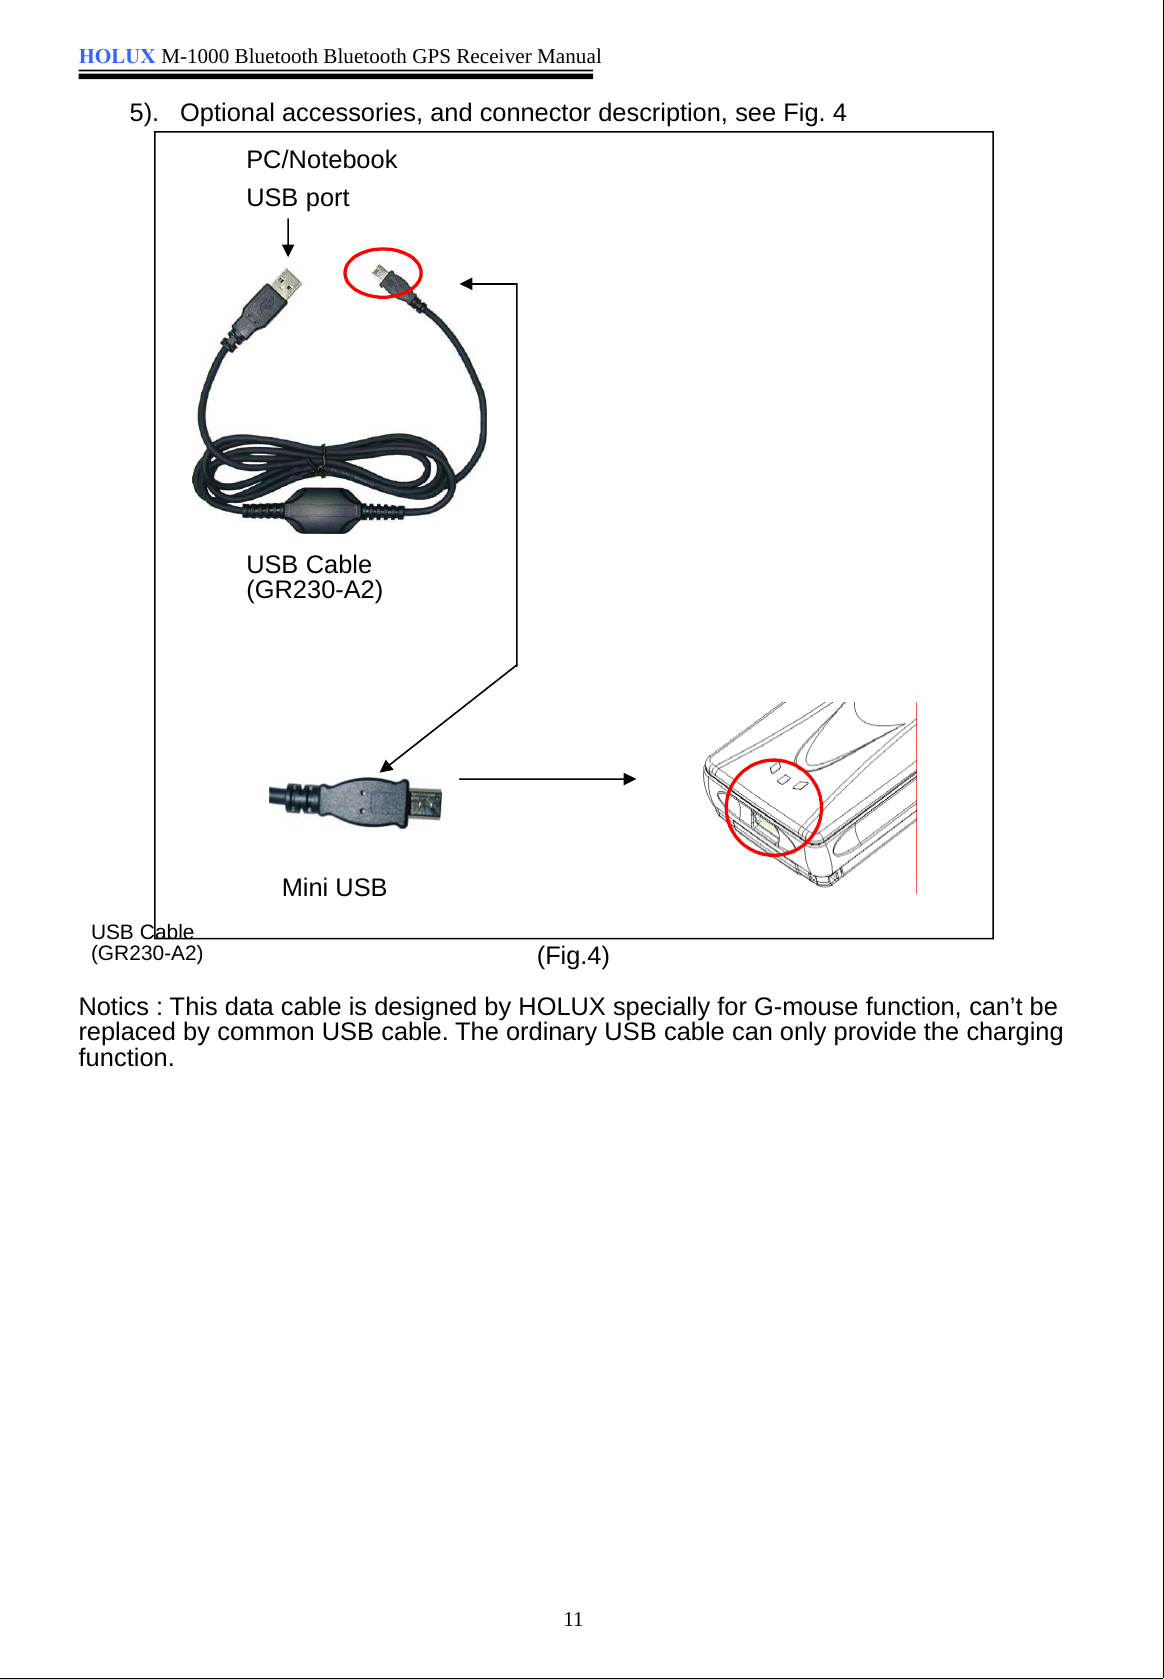 HOLUX M-1000 Bluetooth Bluetooth GPS Receiver Manual115). Optional accessories, and connector description, see Fig. 4(Fig.4)USB Cable(GR230-A2)Notics : This data cable is designed by HOLUX specially for G-mouse function, can’t be        replaced by common USB cable. The ordinary USB cable can only provide the chargingfunction.USB Cable(GR230-A2)Mini USBPC/NotebookUSB port